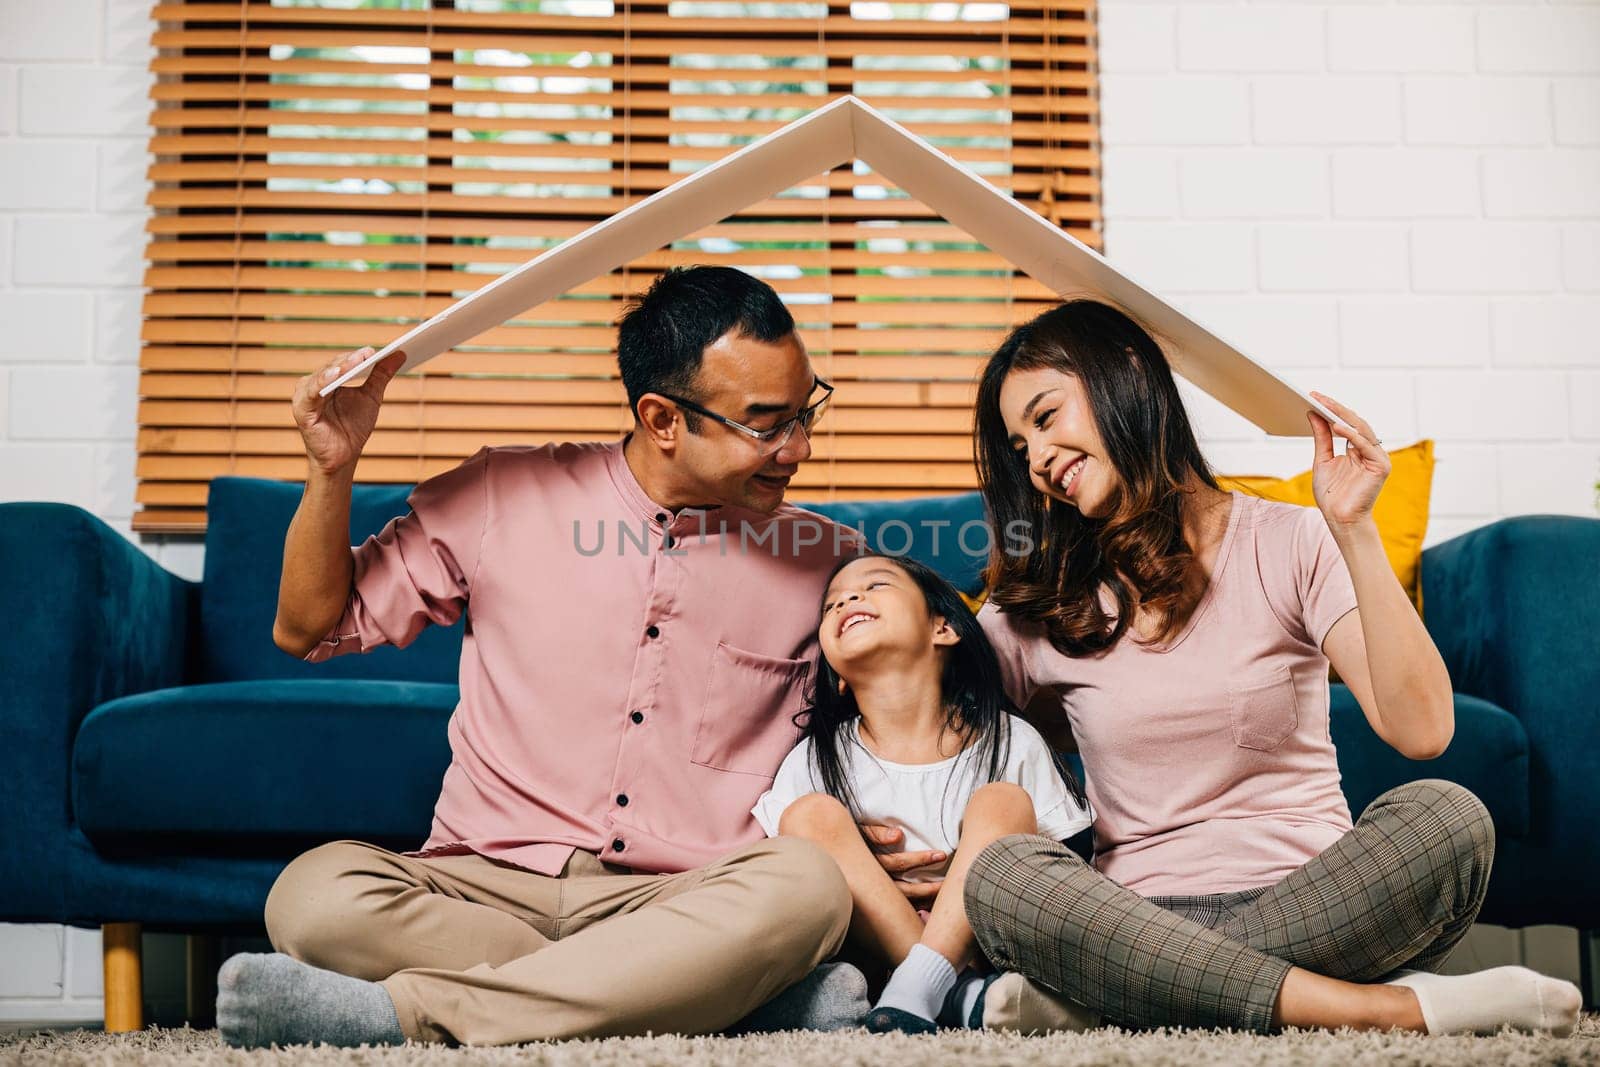 In their new house a loving family holds a cardboard roof on a couch symbolizing investment and happiness. Asian parents and their daughter radiate joy and security.